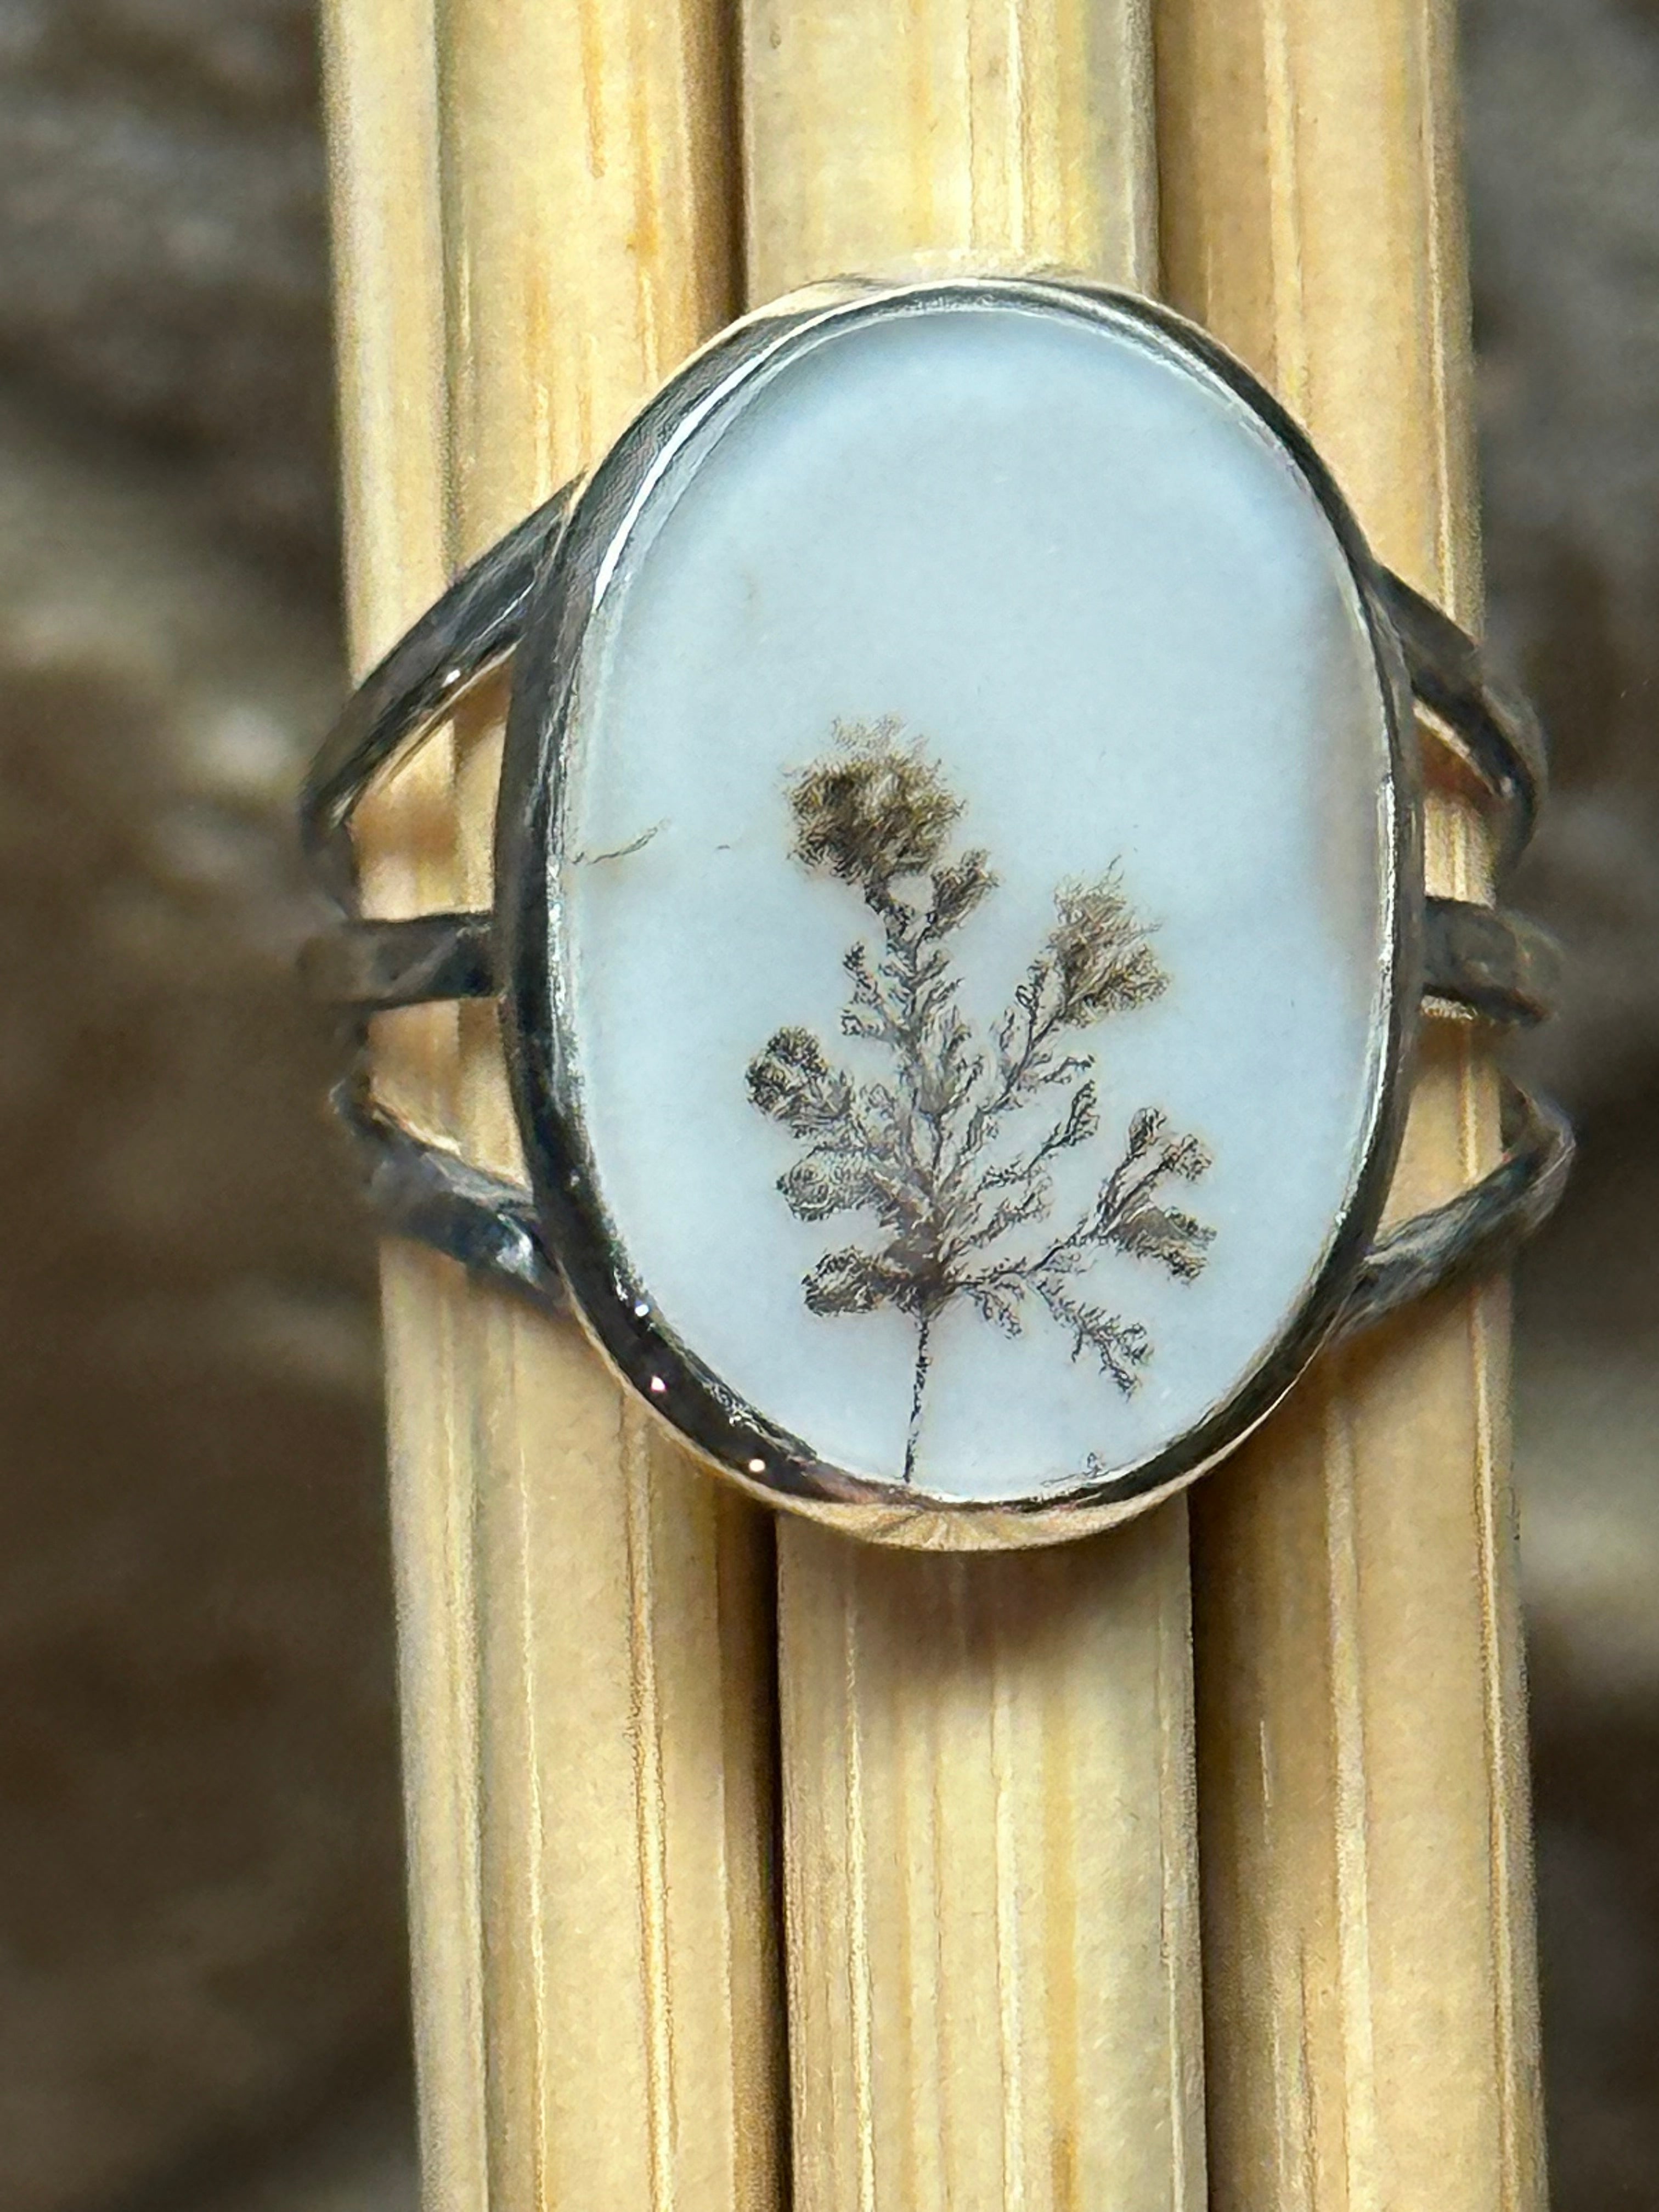 Genuine Georgian Scenic Dendritic Agate 925 Sterling Silver adjustable Ring Size 8.25 - Natural Rocks by Kala